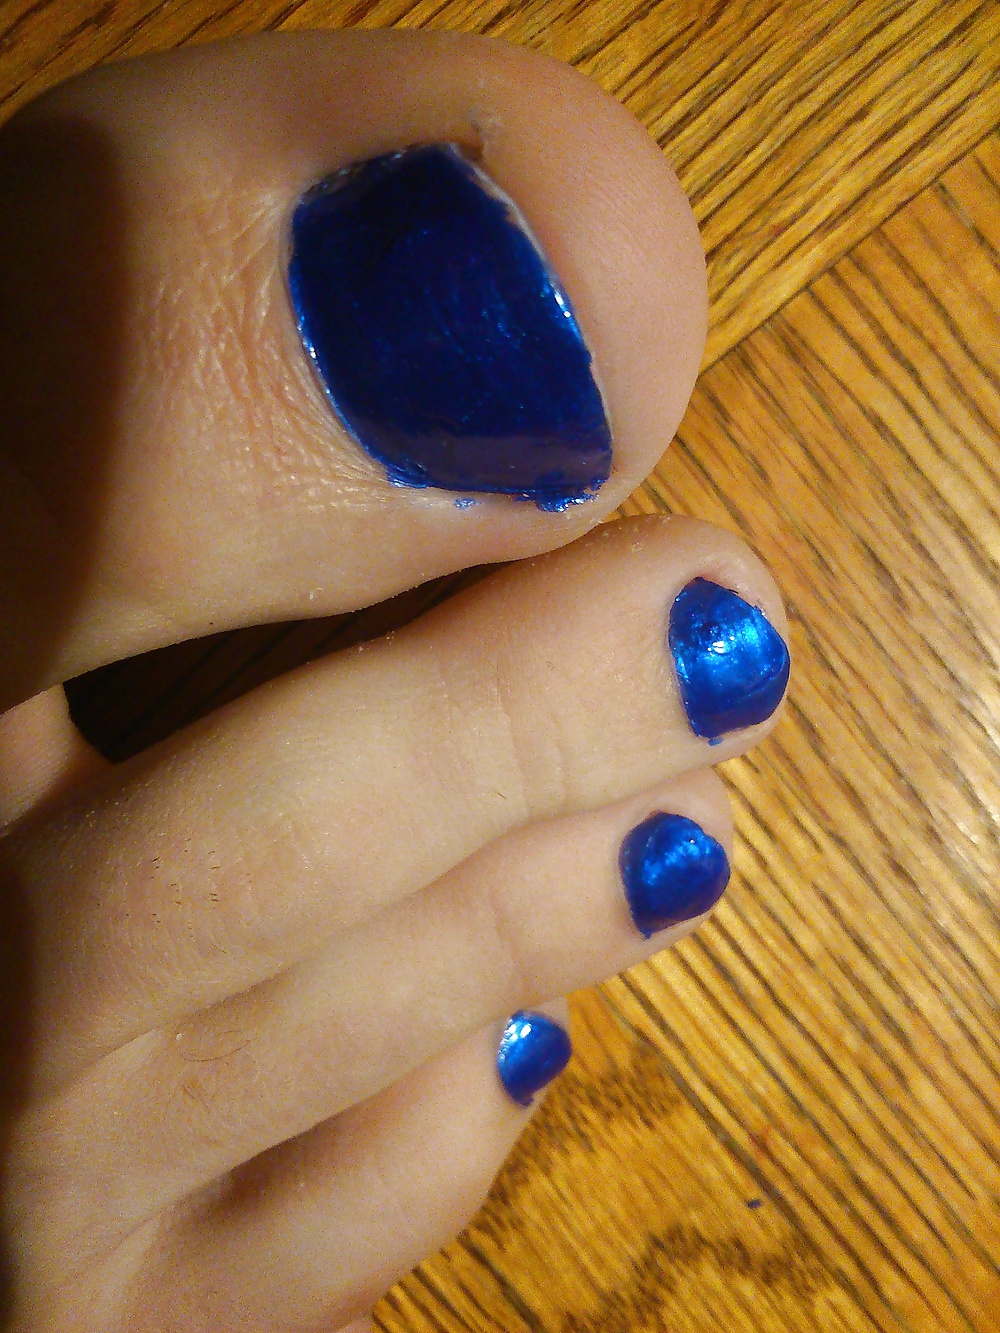 Feet And Toes In Blue Nail Polish And Leather High Heels. #30148012